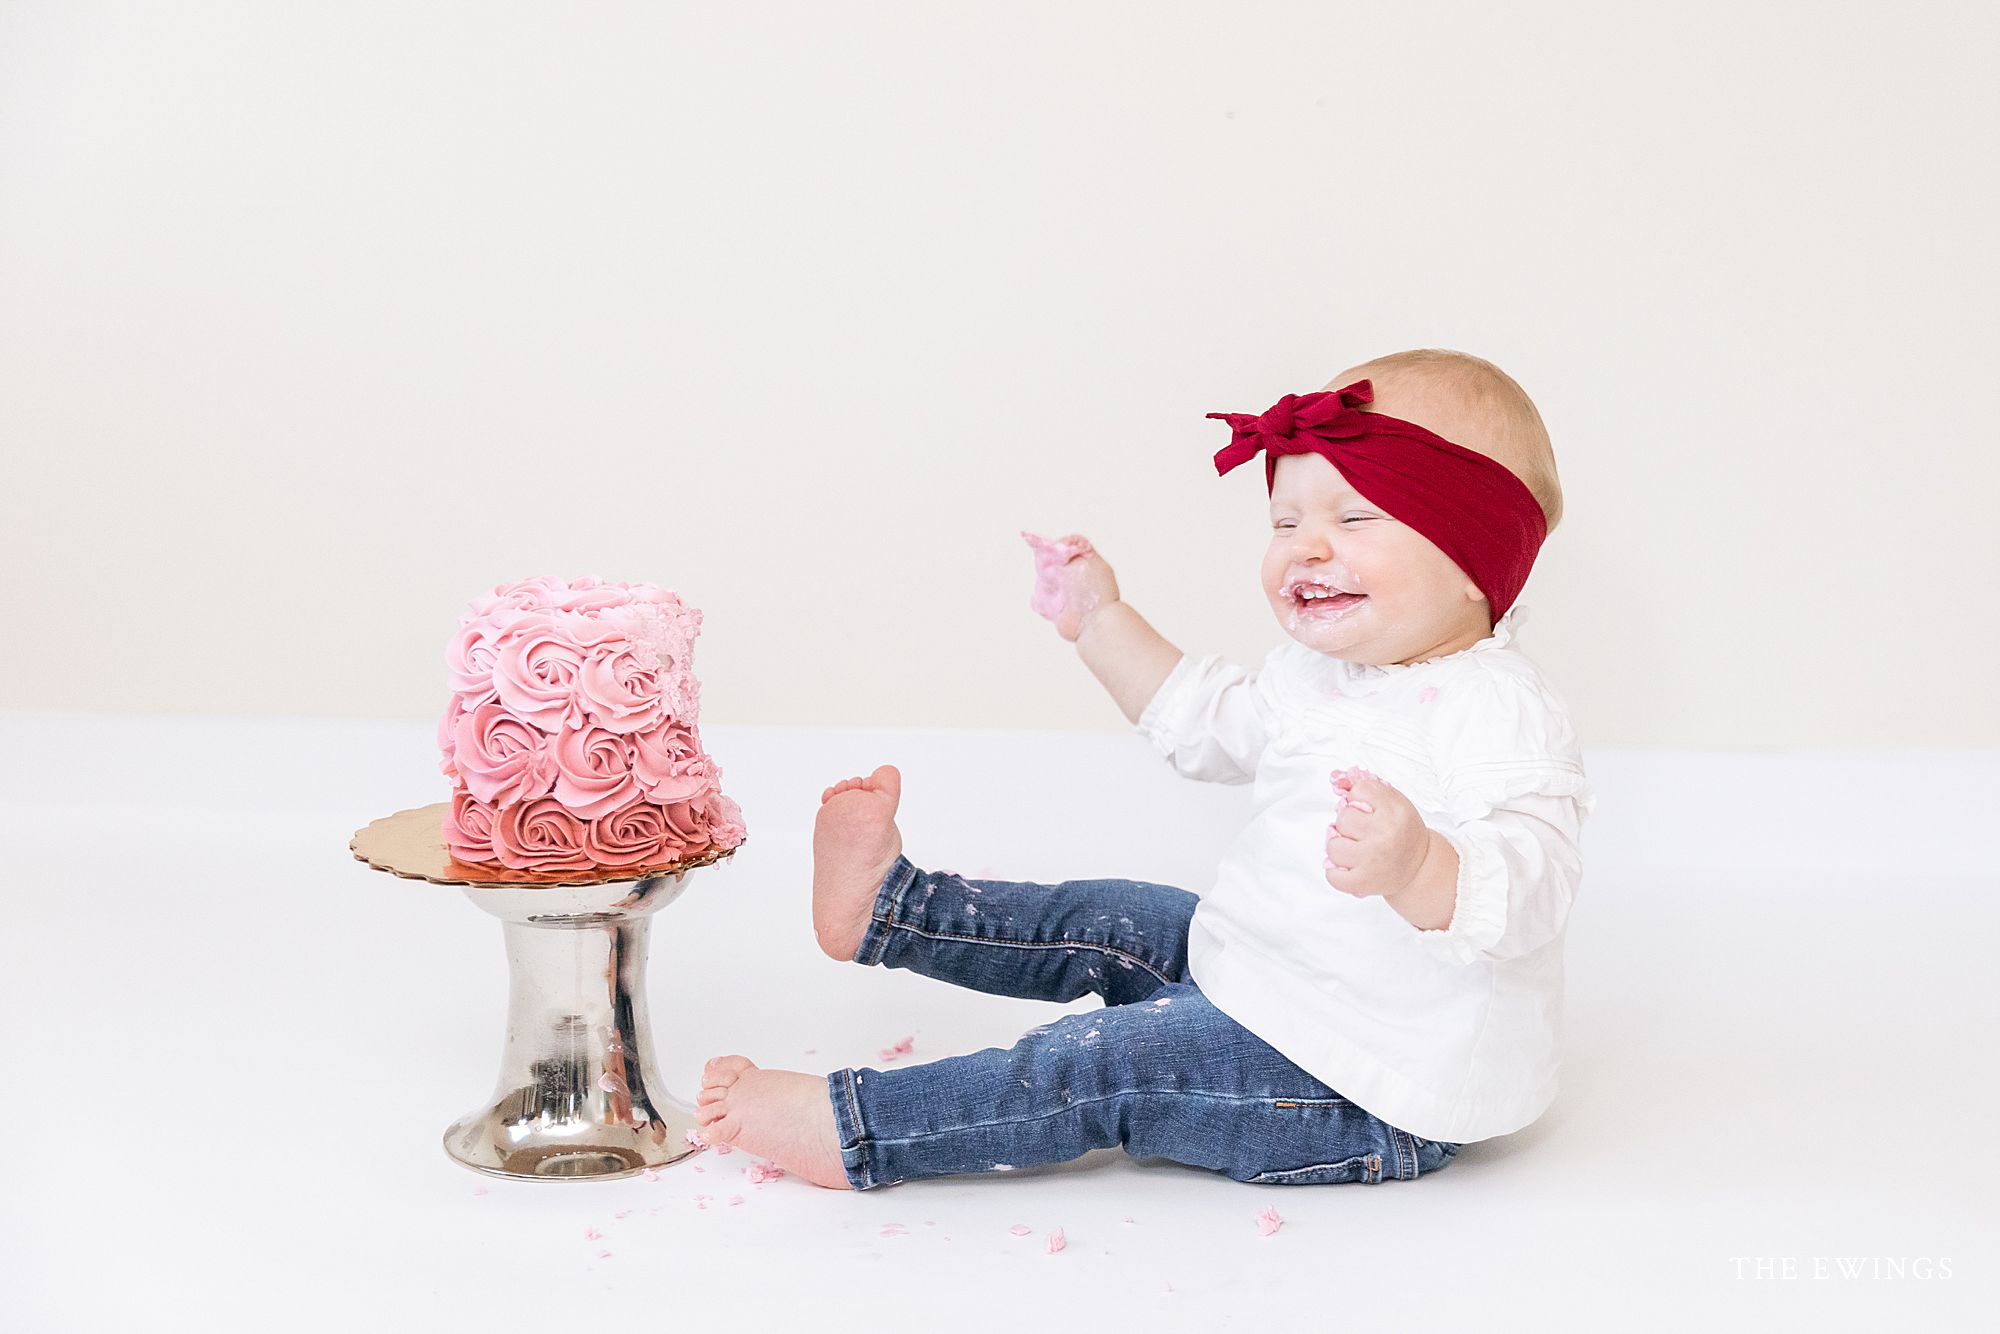 This picture sums up why I love cake smash sessions for one year old babies - their little personalities come out in the best way!